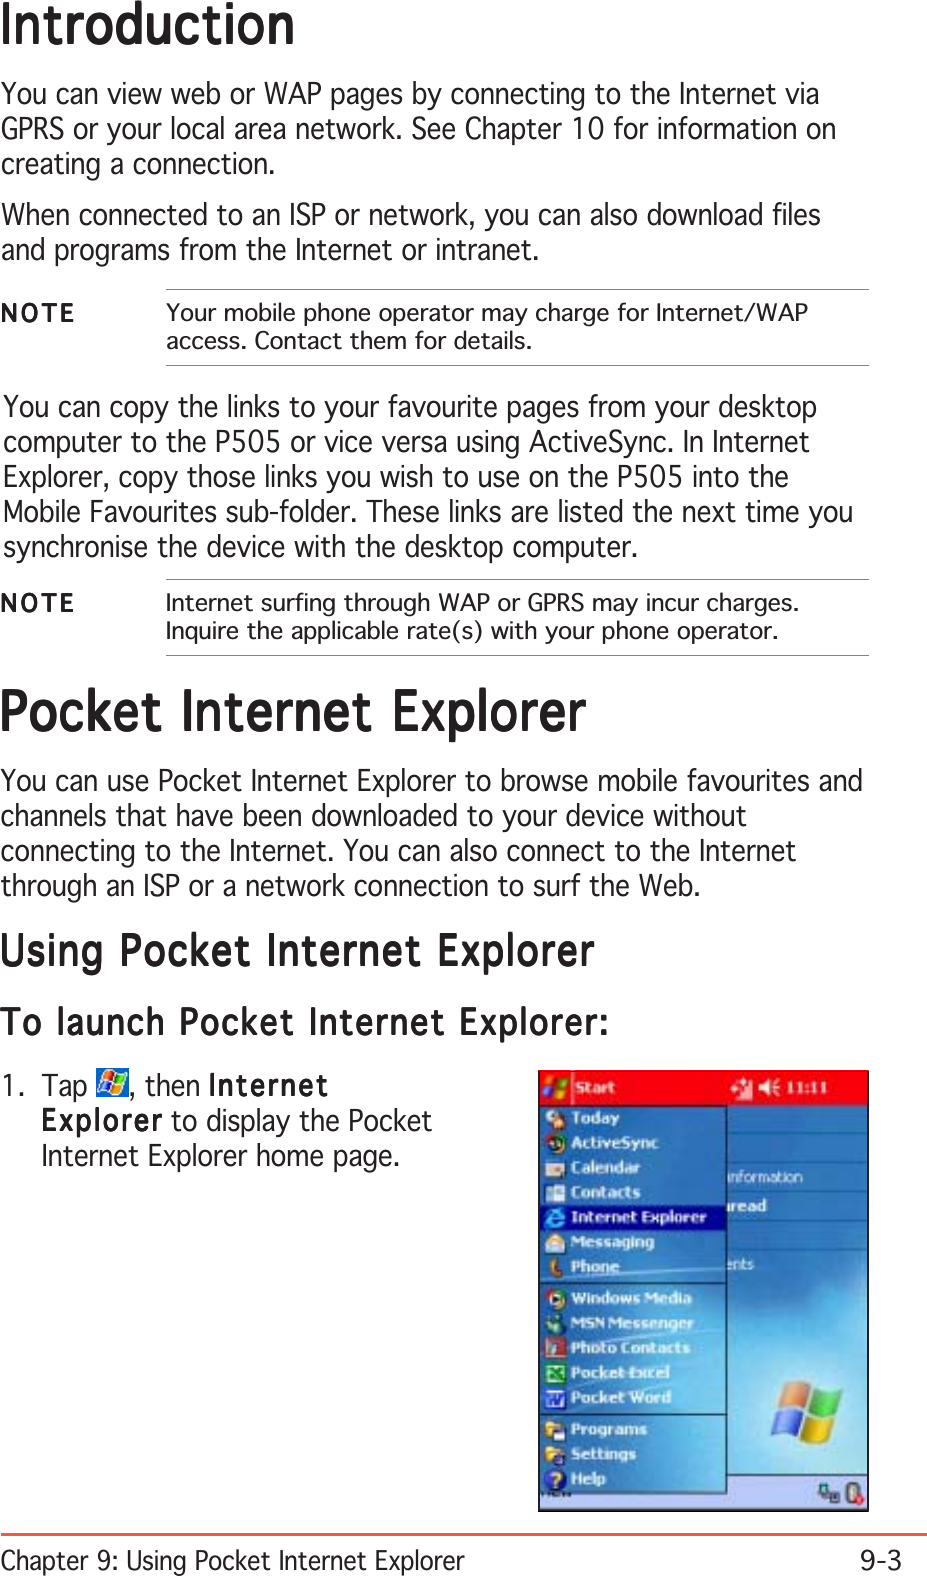 Chapter 9: Using Pocket Internet Explorer9-3IntroductionIntroductionIntroductionIntroductionIntroductionYou can view web or WAP pages by connecting to the Internet viaGPRS or your local area network. See Chapter 10 for information oncreating a connection.When connected to an ISP or network, you can also download filesand programs from the Internet or intranet.NOTENOTENOTENOTEN O T E Your mobile phone operator may charge for Internet/WAPaccess. Contact them for details.Pocket Internet ExplorerPocket Internet ExplorerPocket Internet ExplorerPocket Internet ExplorerPocket Internet ExplorerYou can use Pocket Internet Explorer to browse mobile favourites andchannels that have been downloaded to your device withoutconnecting to the Internet. You can also connect to the Internetthrough an ISP or a network connection to surf the Web.Using Pocket Internet ExplorerUsing Pocket Internet ExplorerUsing Pocket Internet ExplorerUsing Pocket Internet ExplorerUsing Pocket Internet ExplorerTo launch Pocket Internet Explorer:To launch Pocket Internet Explorer:To launch Pocket Internet Explorer:To launch Pocket Internet Explorer:To launch Pocket Internet Explorer:1. Tap  , then InternetInternetInternetInternetInternetExplorerExplorerExplorerExplorerExplorer to display the PocketInternet Explorer home page.NOTENOTENOTENOTEN O T E Internet surfing through WAP or GPRS may incur charges.Inquire the applicable rate(s) with your phone operator.You can copy the links to your favourite pages from your desktopcomputer to the P505 or vice versa using ActiveSync. In InternetExplorer, copy those links you wish to use on the P505 into theMobile Favourites sub-folder. These links are listed the next time yousynchronise the device with the desktop computer.